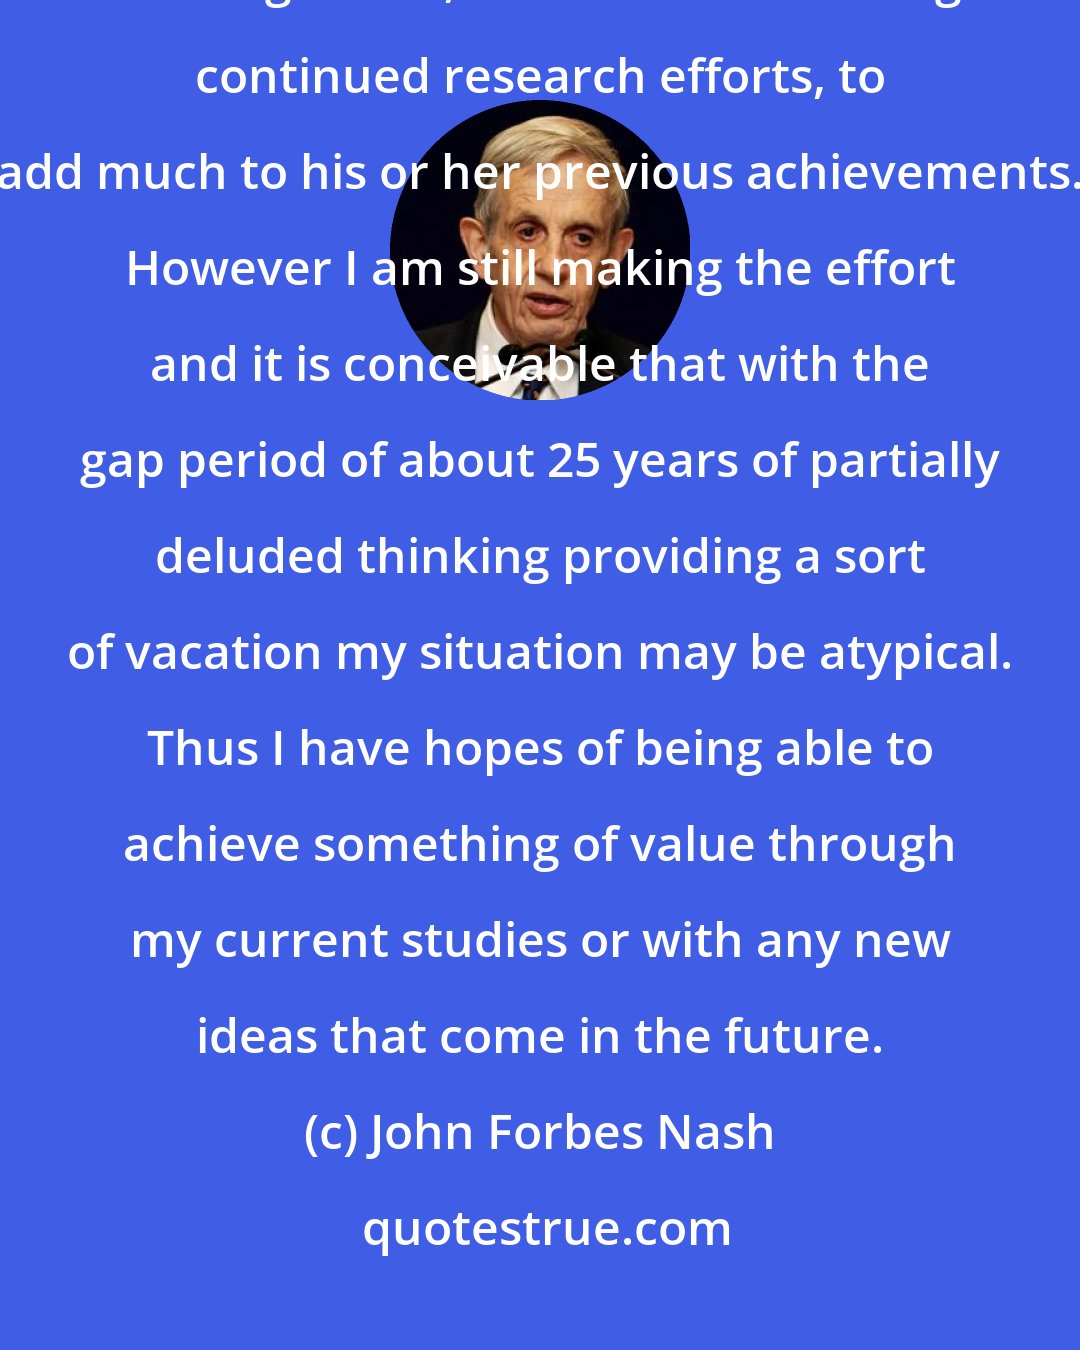 John Forbes Nash: Statistically, it would seem improbable that any mathematician or scientist, at the age of 66, would be able through continued research efforts, to add much to his or her previous achievements. However I am still making the effort and it is conceivable that with the gap period of about 25 years of partially deluded thinking providing a sort of vacation my situation may be atypical. Thus I have hopes of being able to achieve something of value through my current studies or with any new ideas that come in the future.